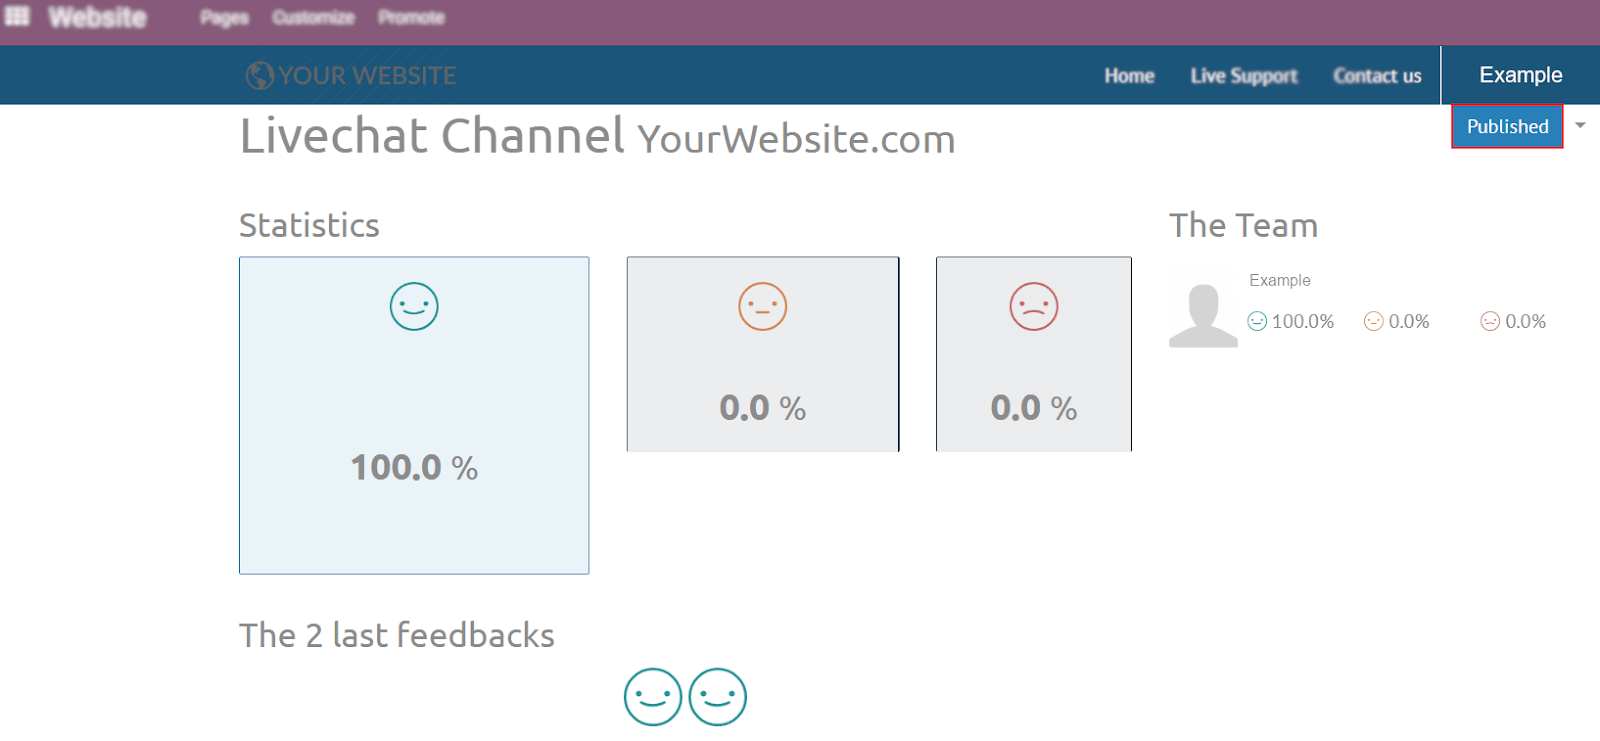 View of the public ratings in the website for Flectra Live Chat